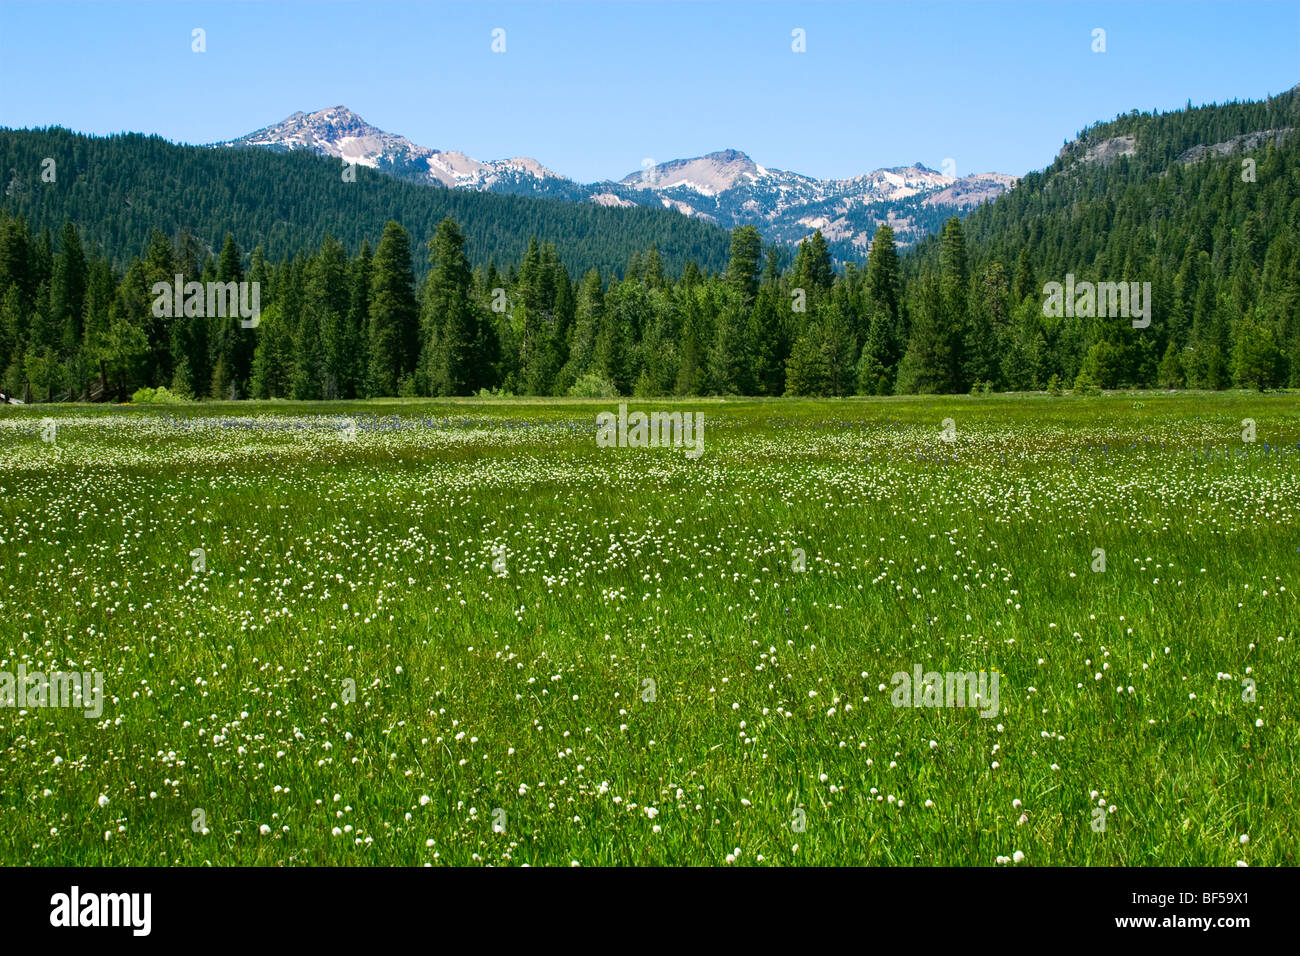 Agriculture - A healthy green mountain pasture near Mt. Lassen / Northern California, USA. Stock Photo